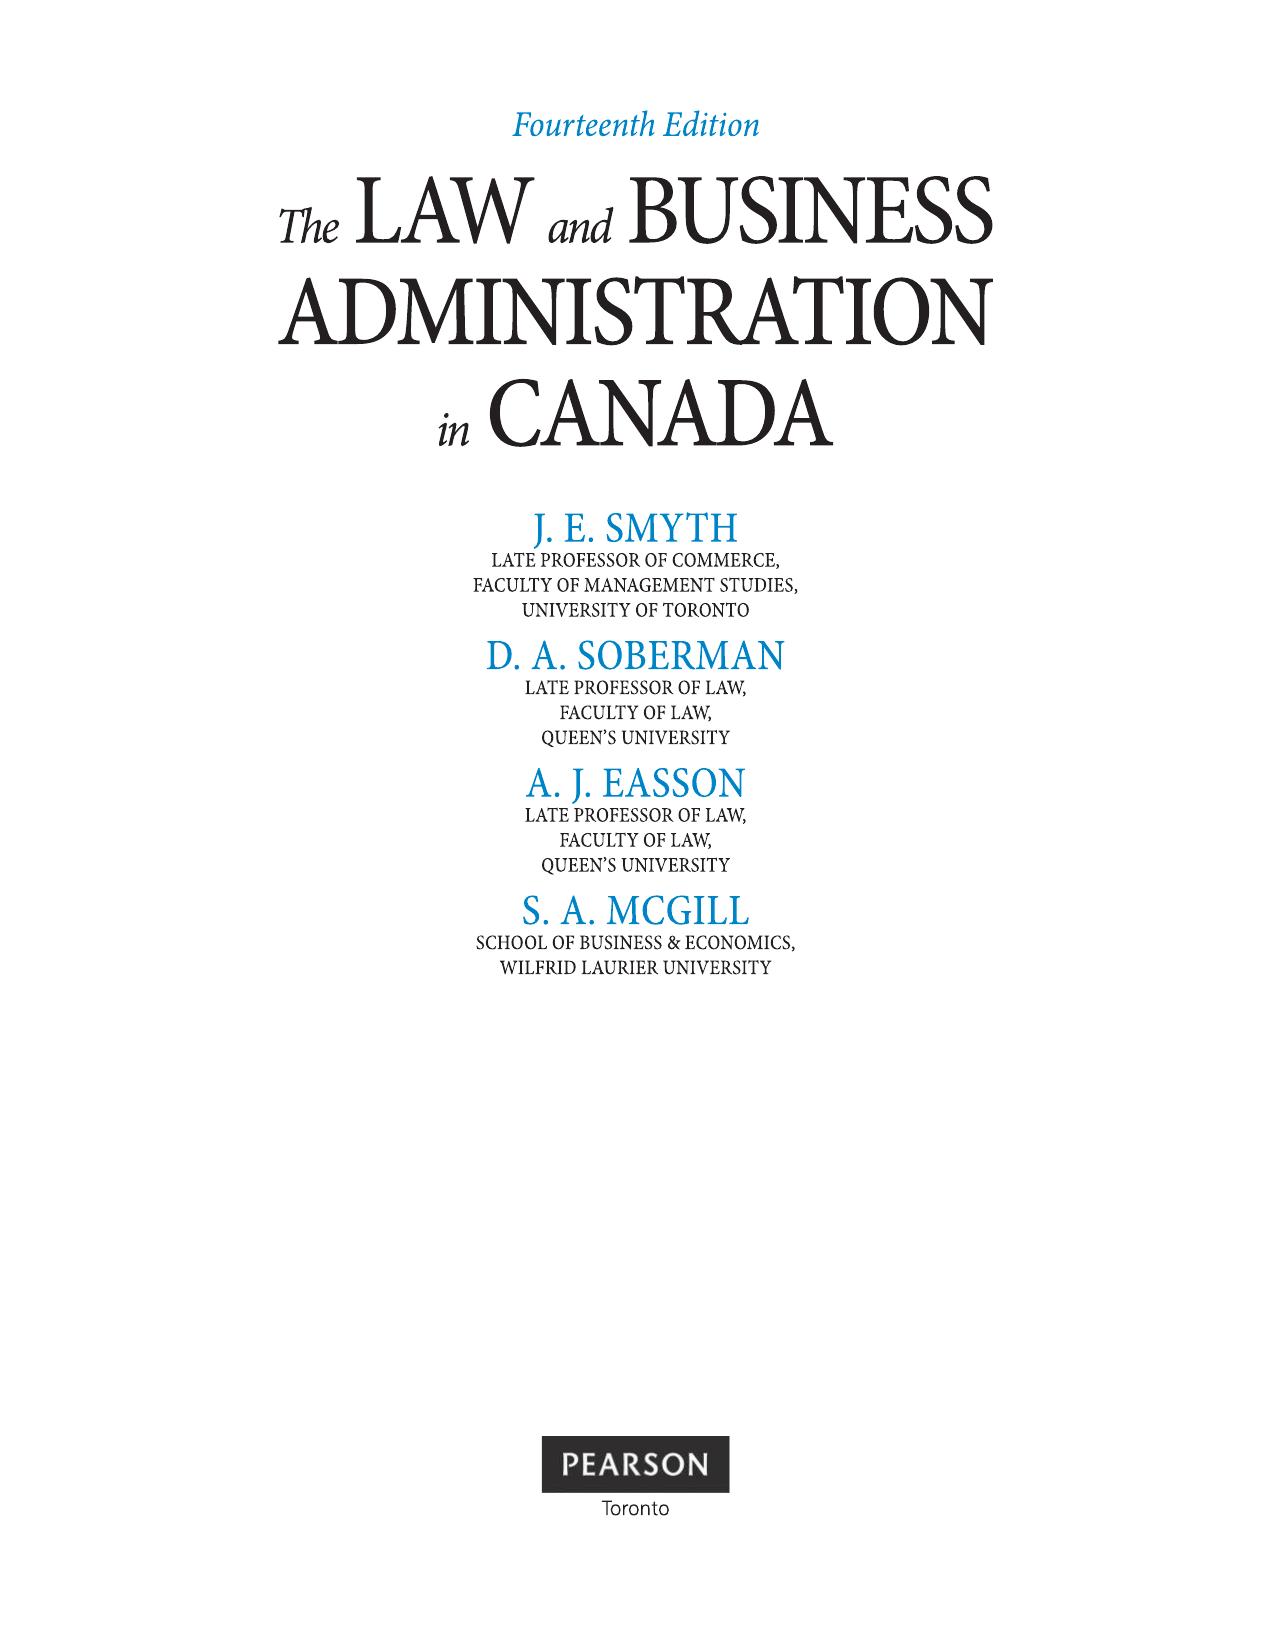 The Law and Business Administration in Canada 14th ed(1).pdf